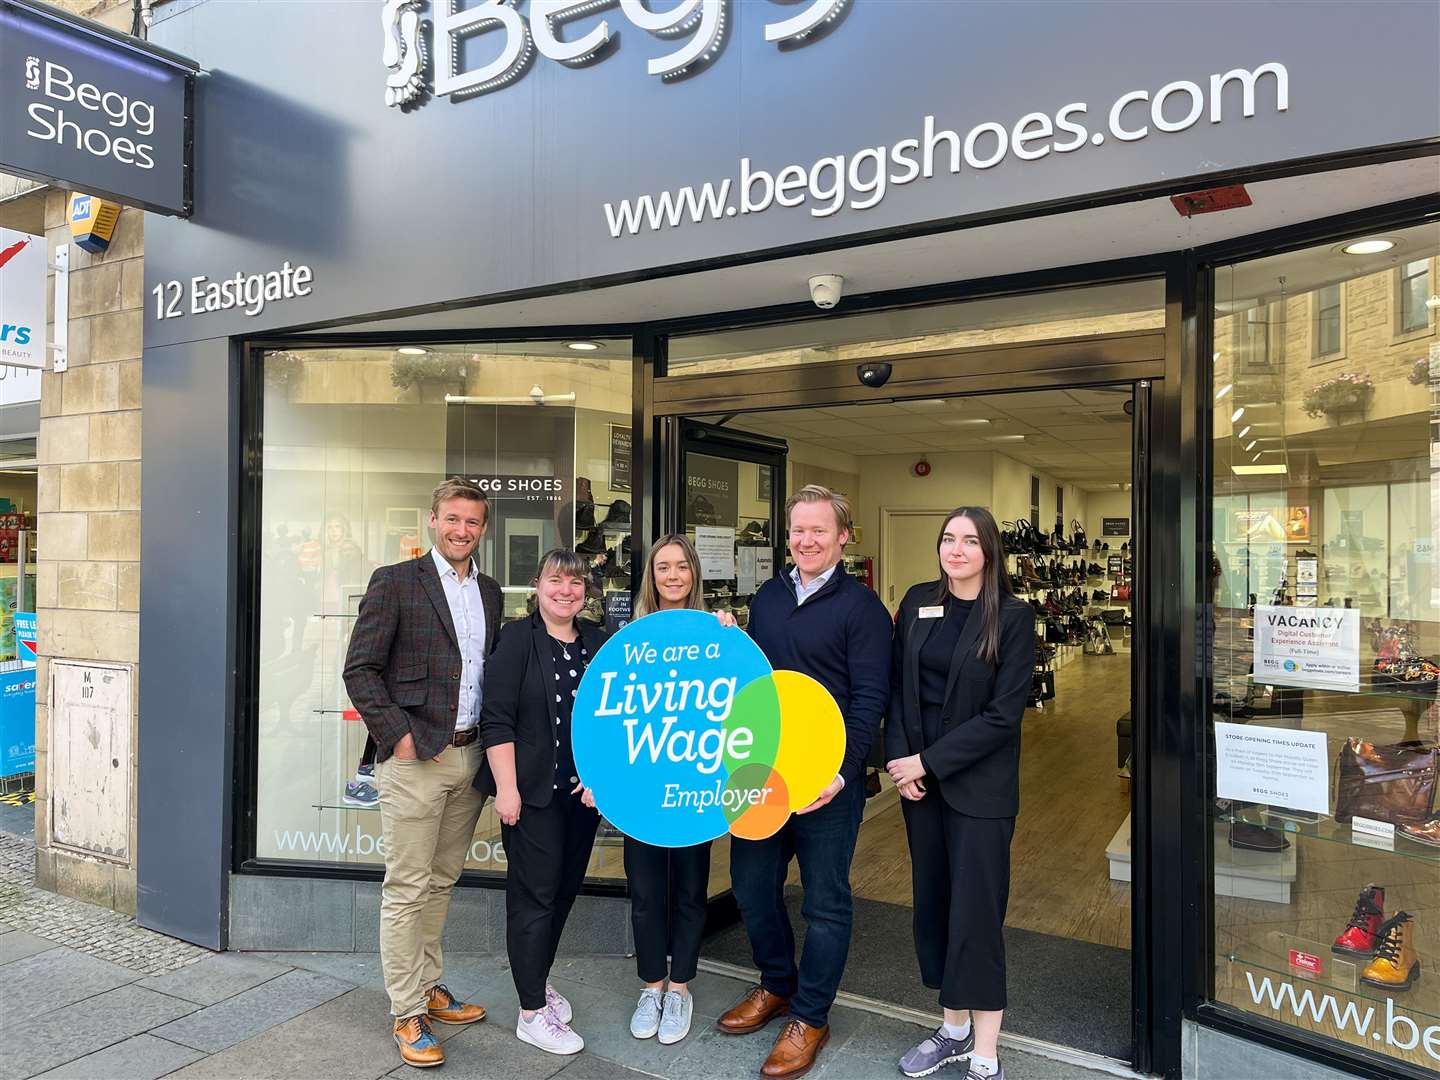 The Begg Shoes team outside the store in Eastgate, Inverness.